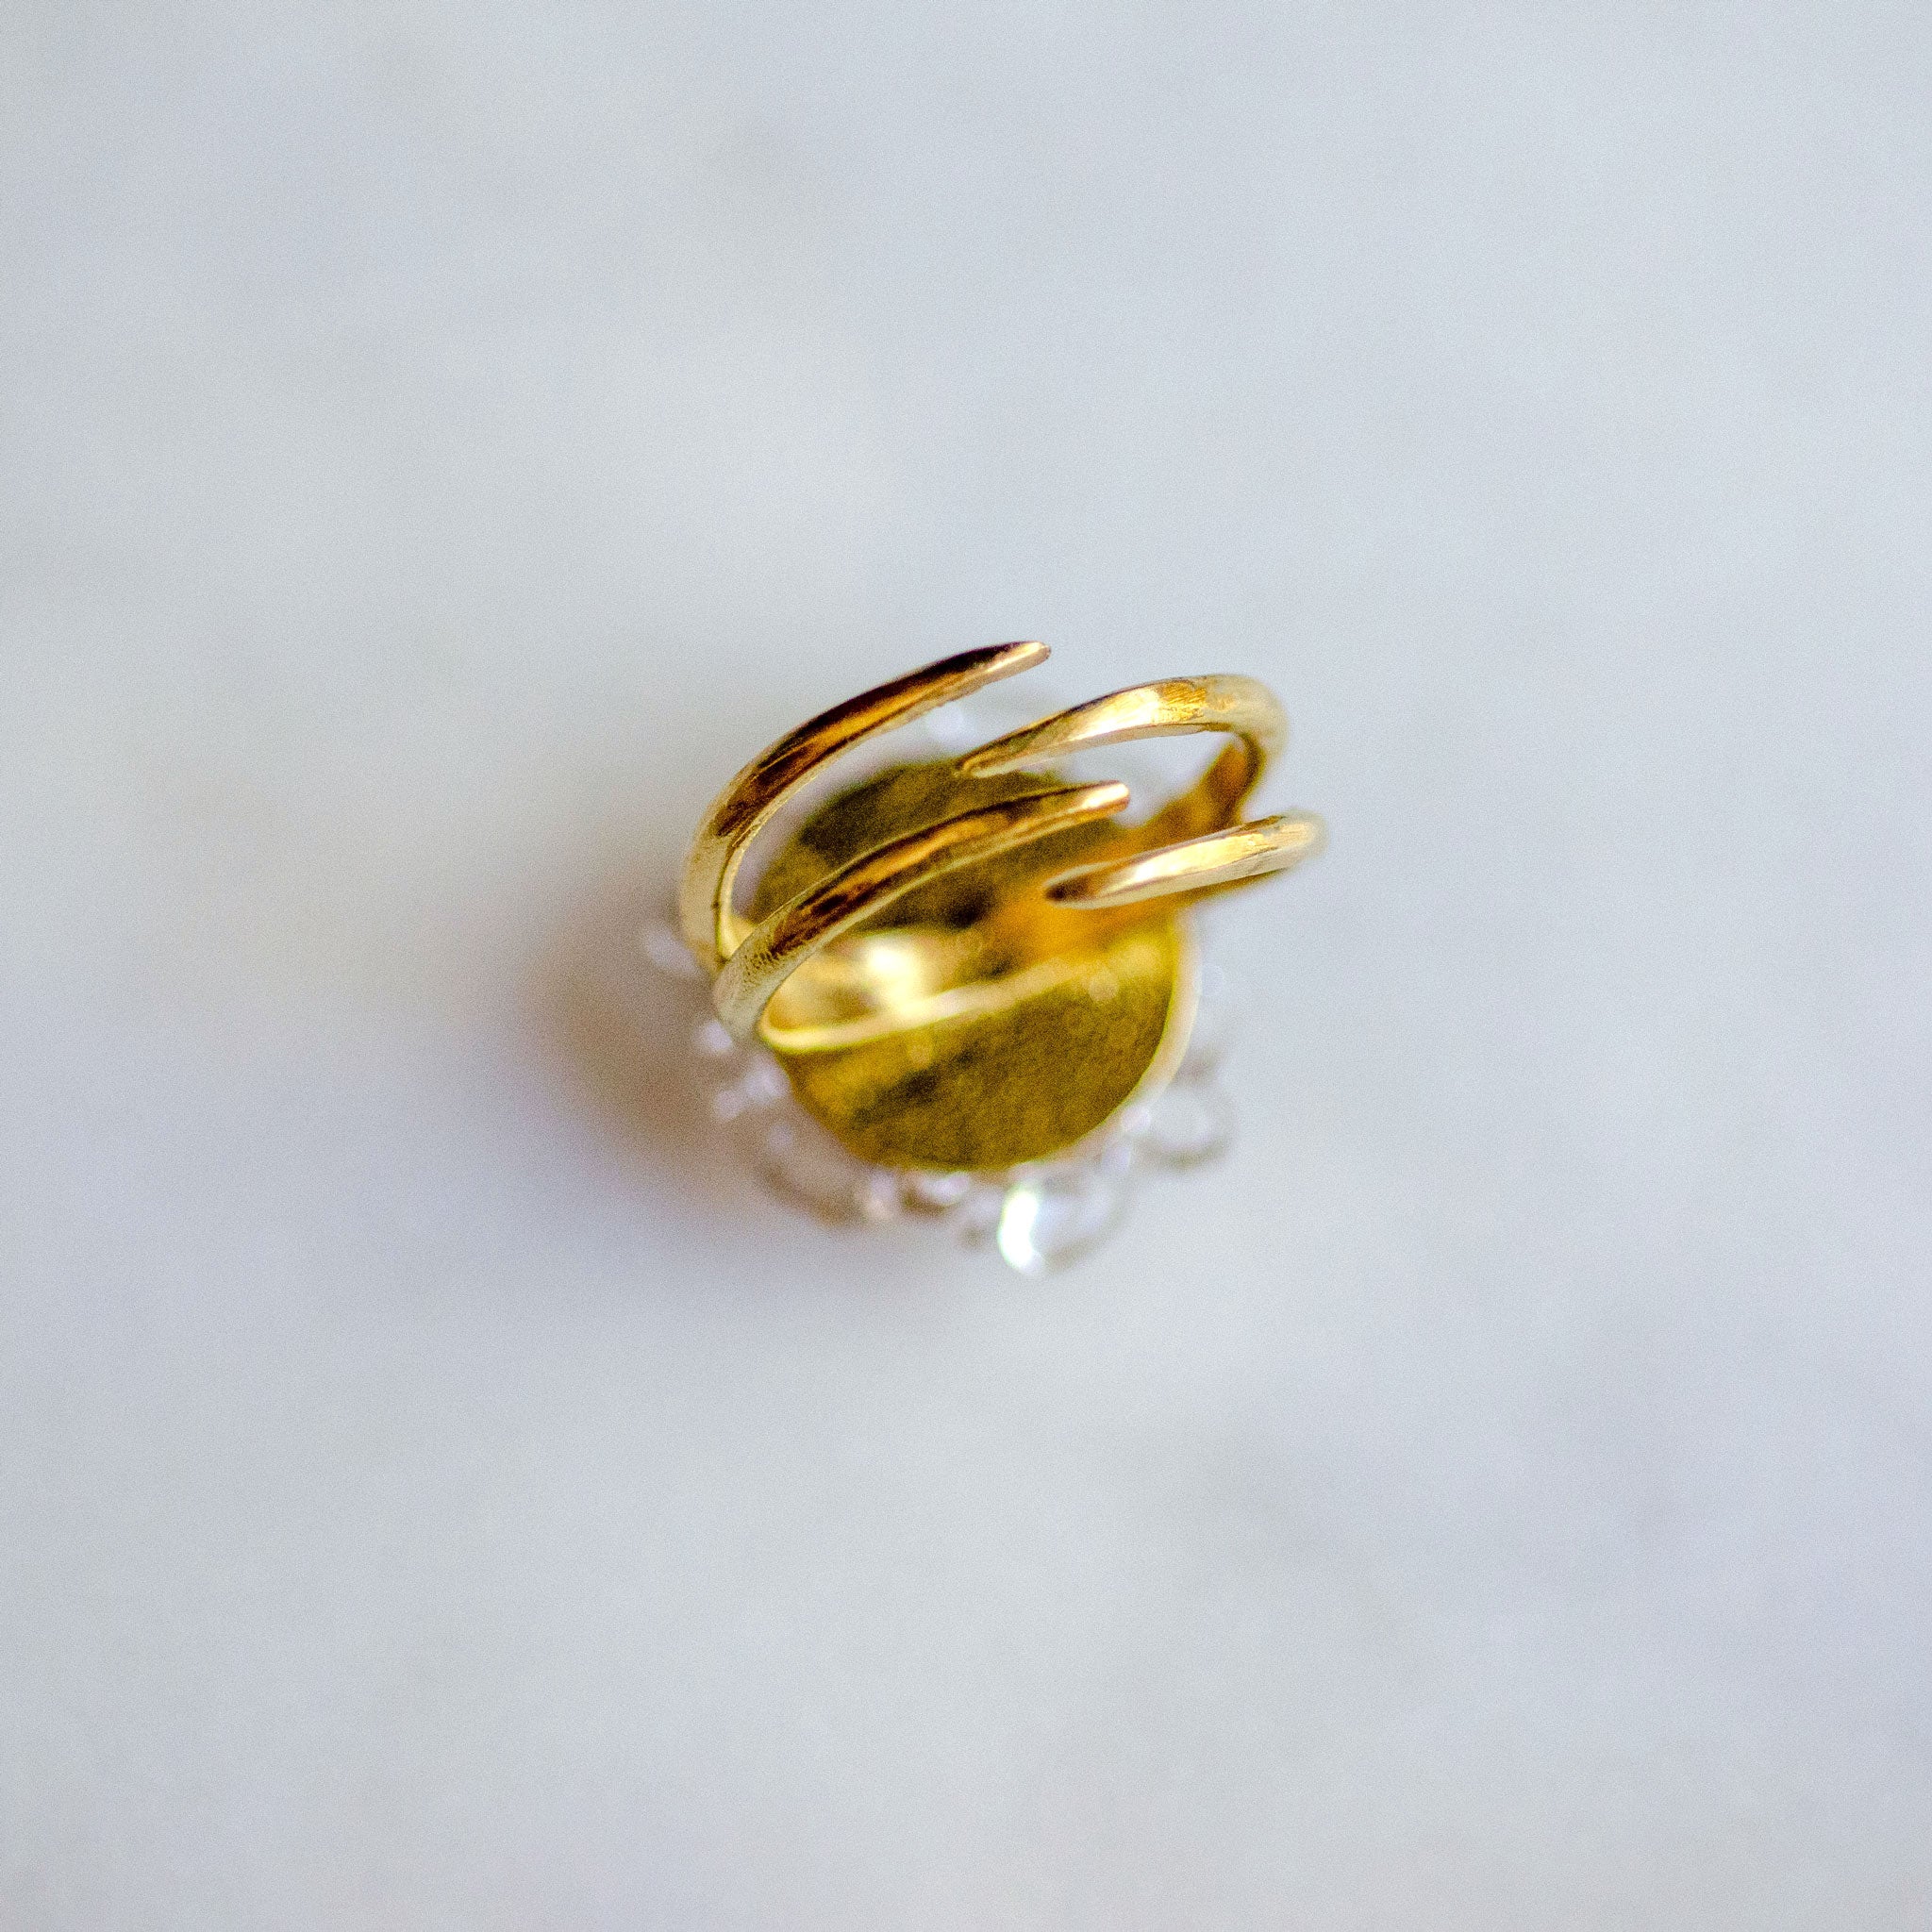 Band view of glass and brass adjustable ring with 22 karat gold luster